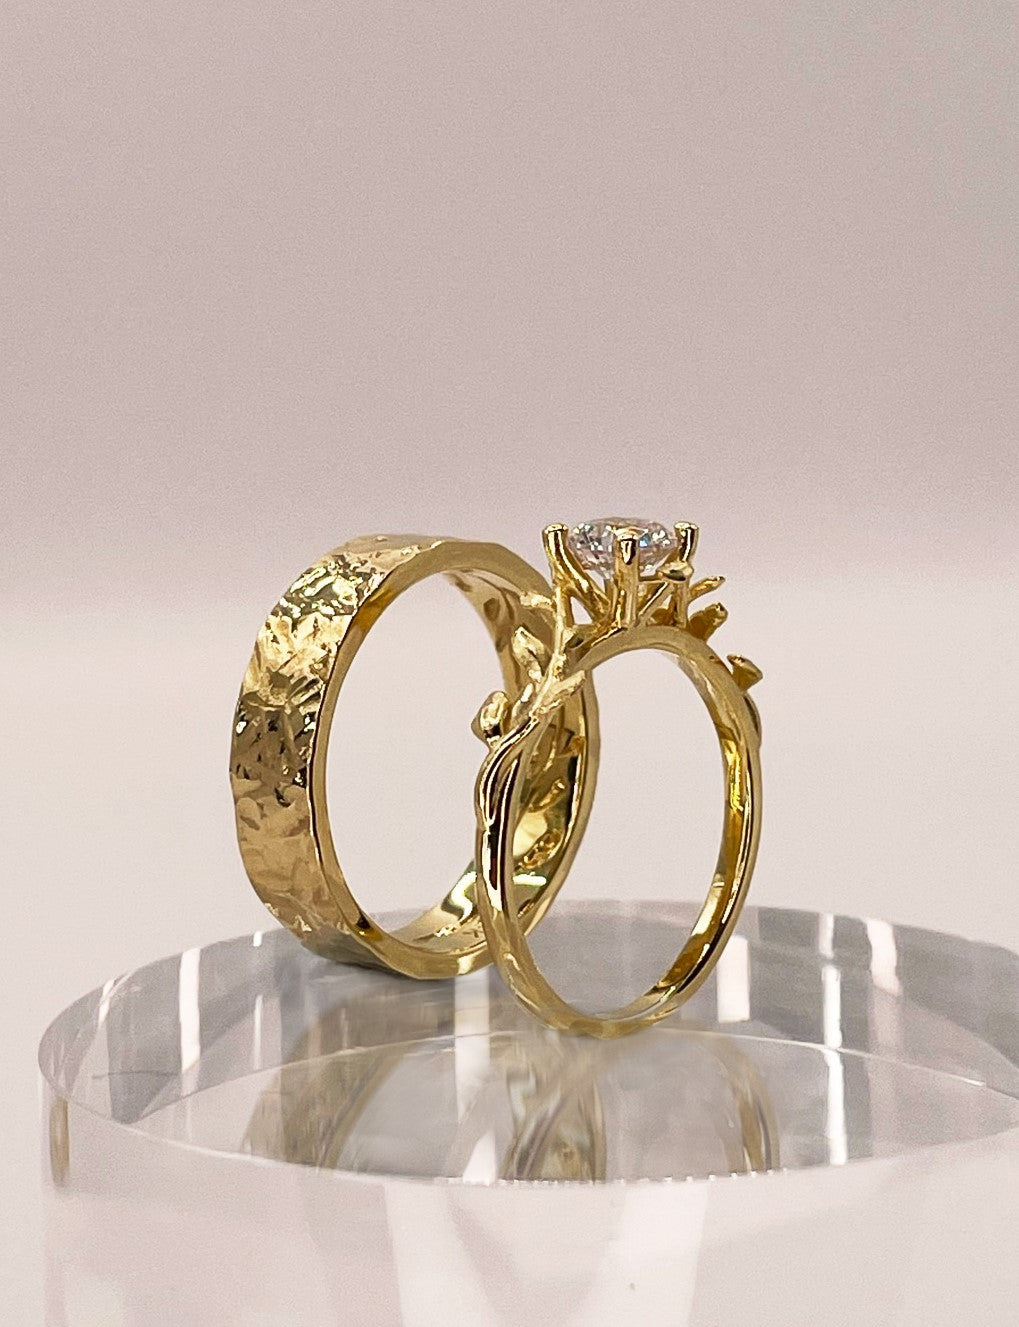 Pin on Wedding Rings | Couple Gold Plated Ring by menjewell.com